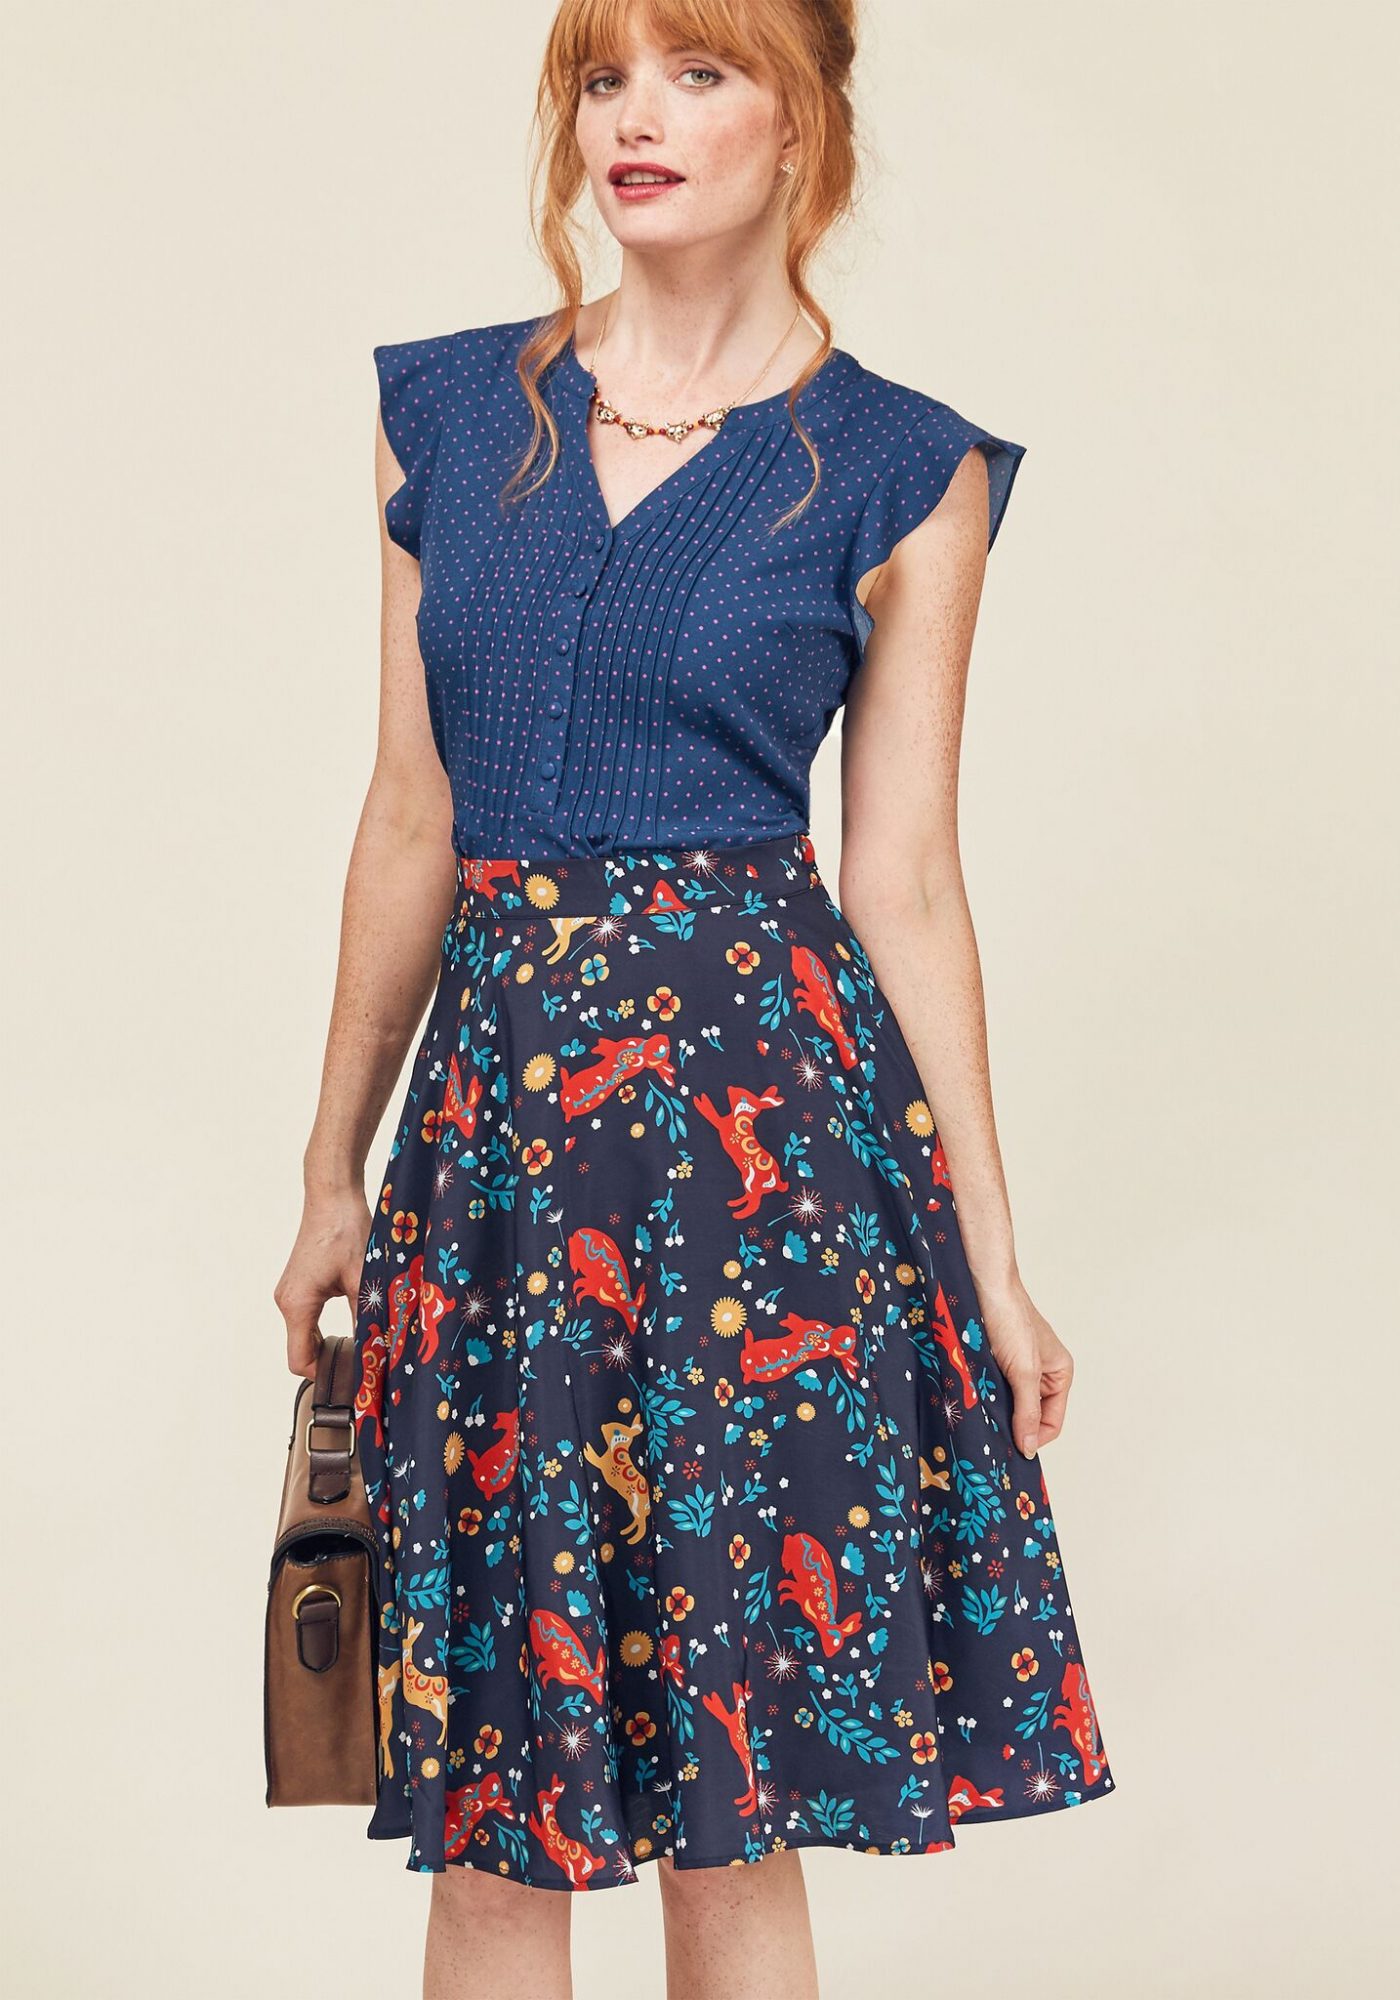 picture-of-modcloth-skirt-photo.jpg